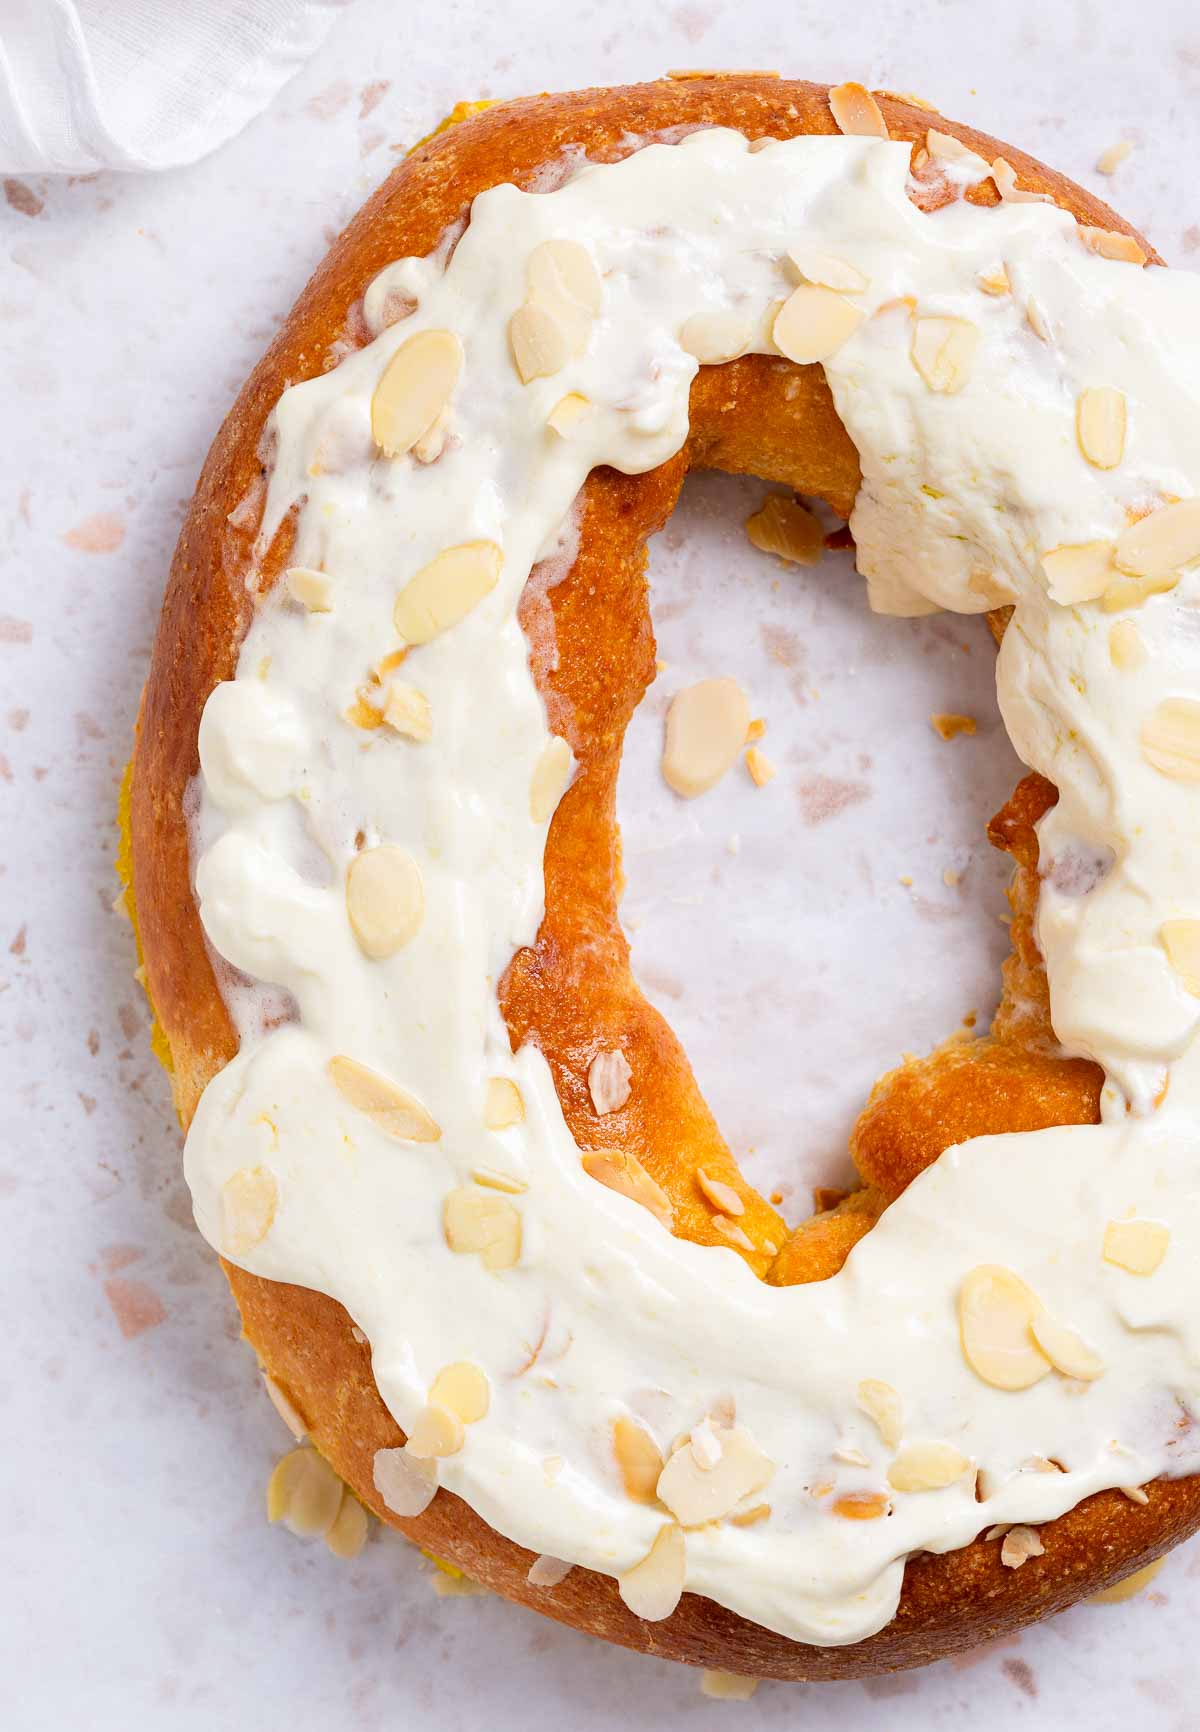 A  keto pumpkin kringle danish is a pastry ring with a pumpkin cream filling, and cream cheese frosting with sliced almonds for garnish.